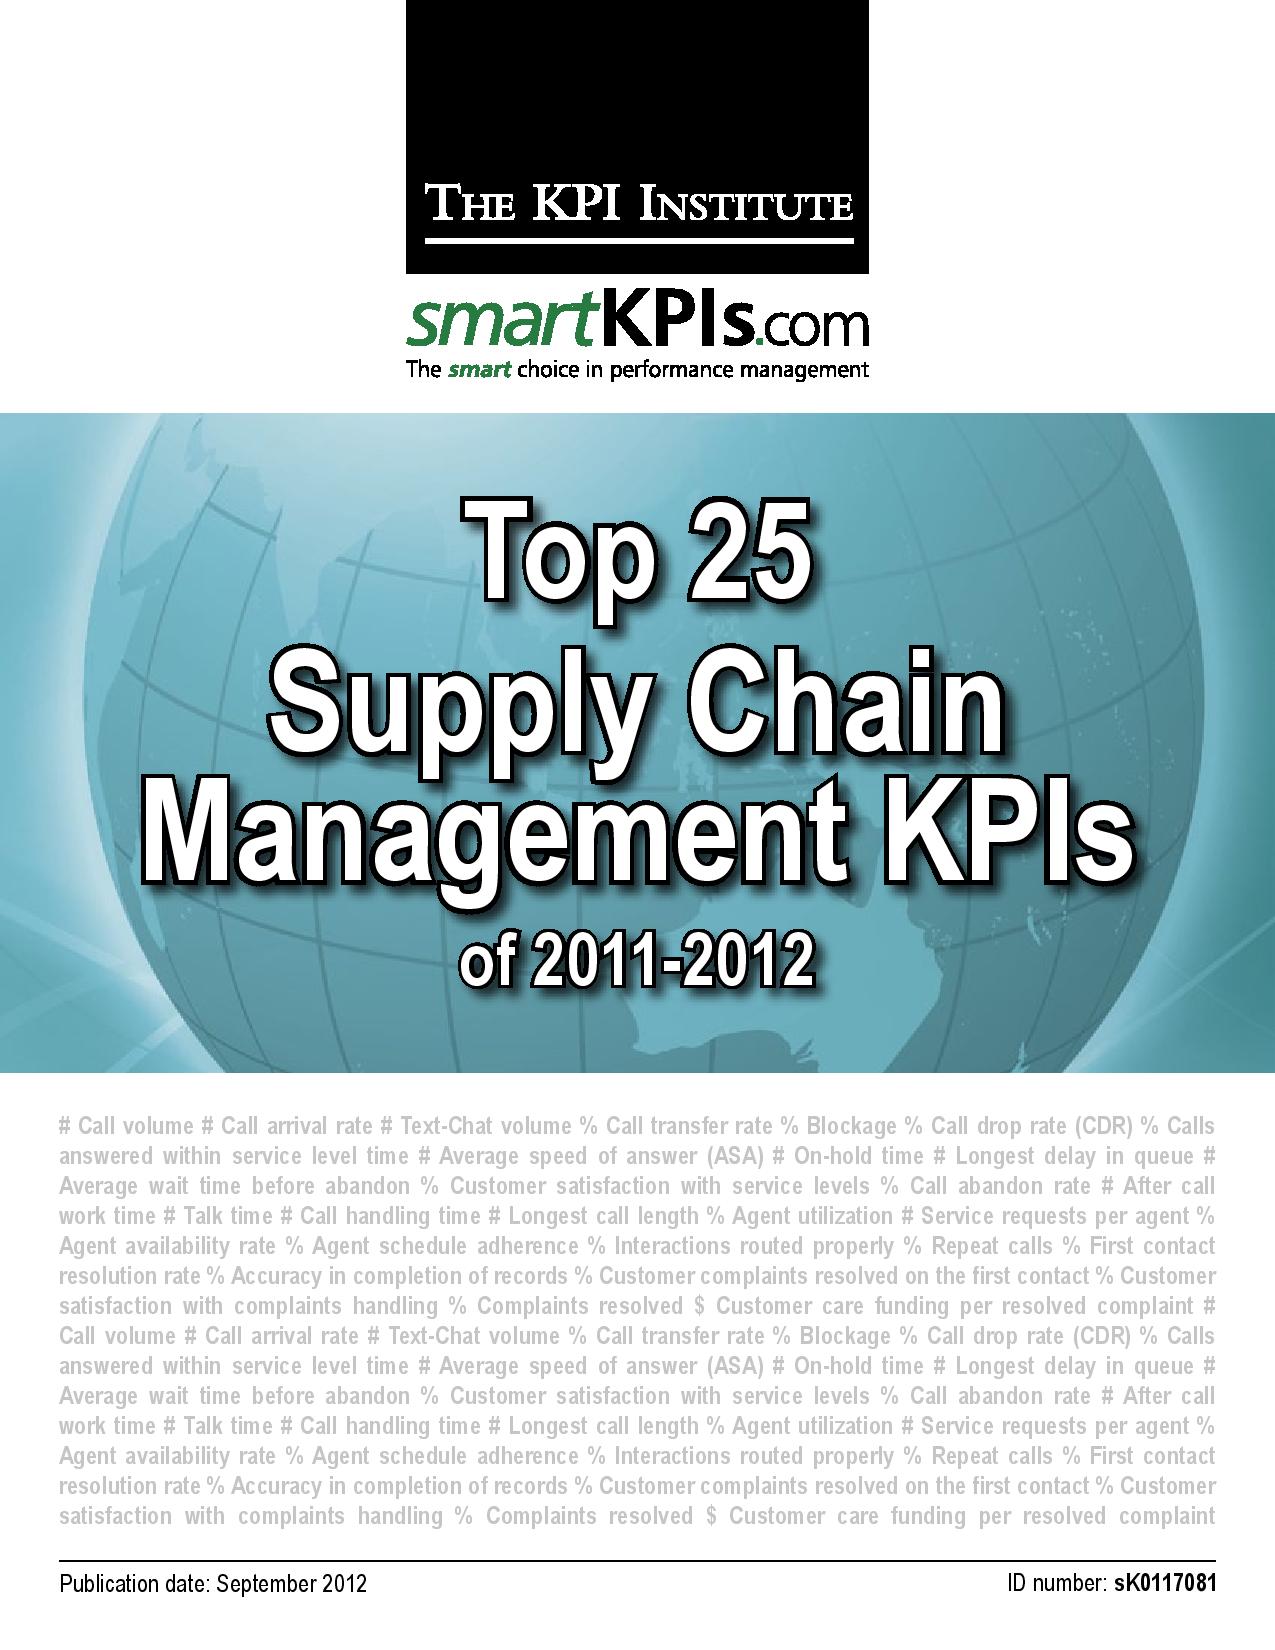 Measuring Supply Chain Performance: Guide to Key Performance